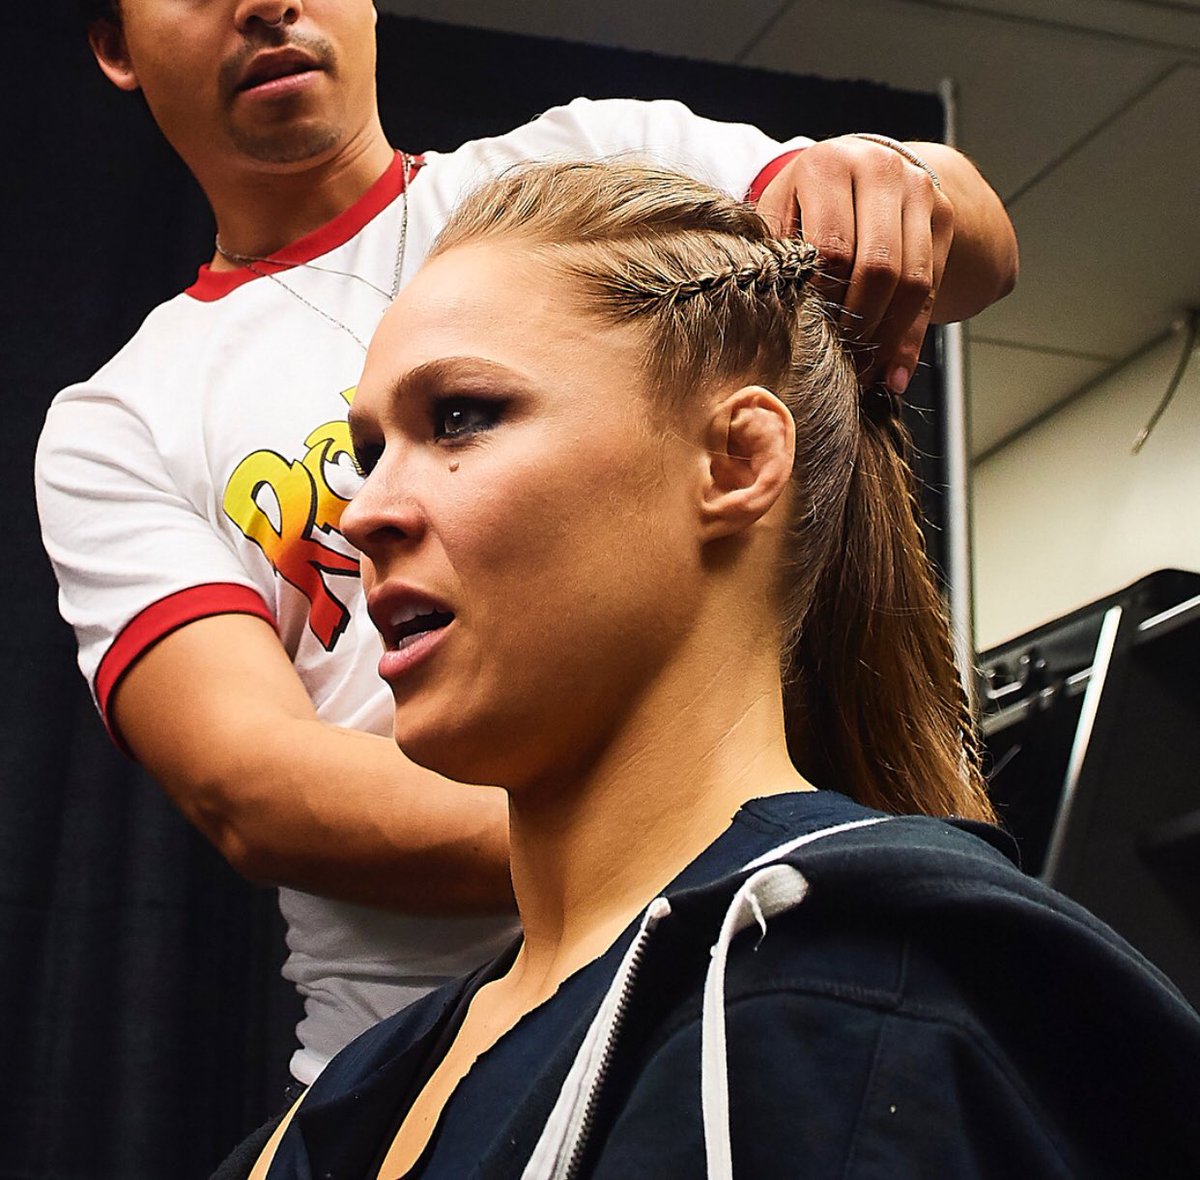 Ronda Rousey - The Baddest Woman On The Planet - #RondaRousey | Facebook